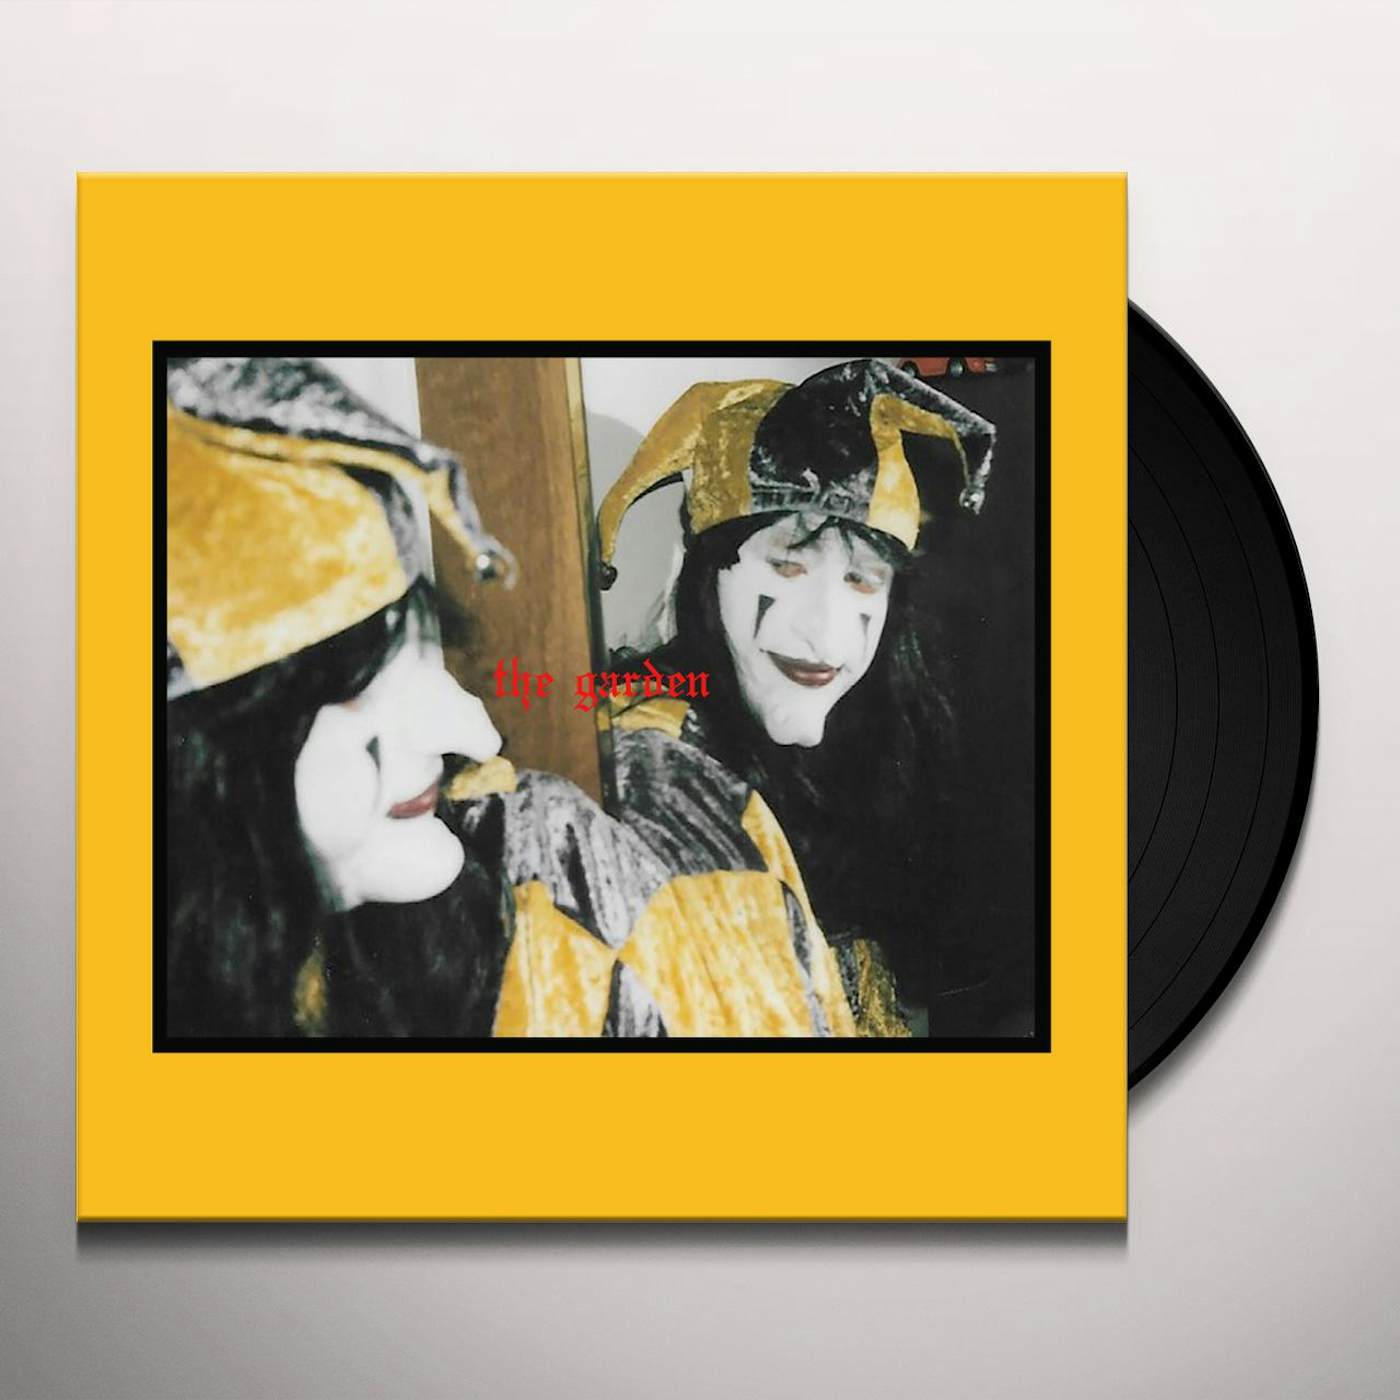 The Garden Mirror Might Steal Your Charm Vinyl Record